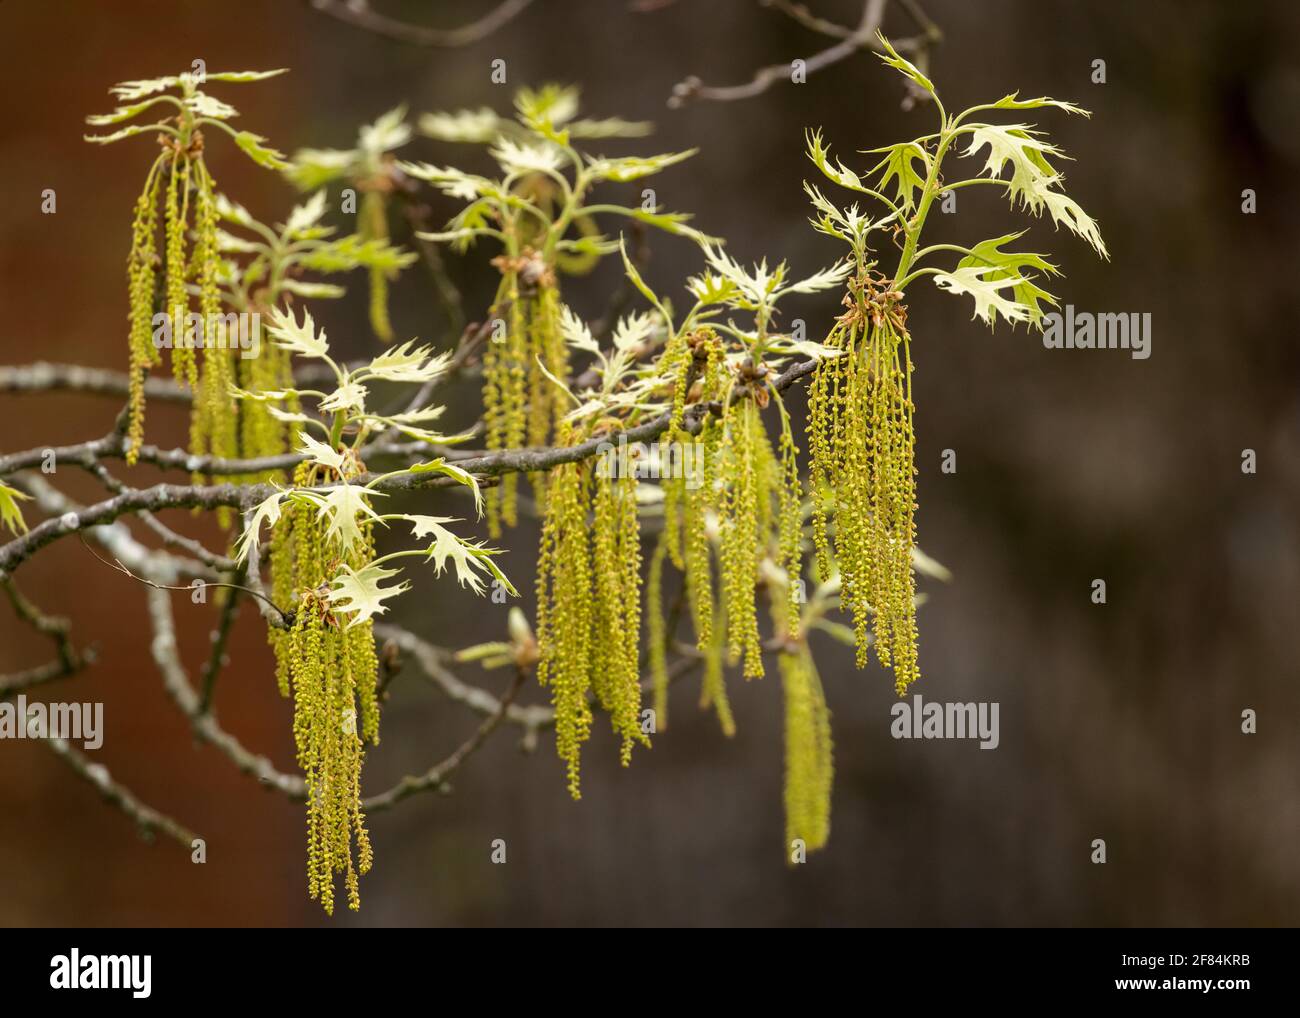 Southern Red Oak (Quercus falcata) catkins - Hall County, Georgia. Catkins hang like tassels from a red oak tree during spring. Stock Photo